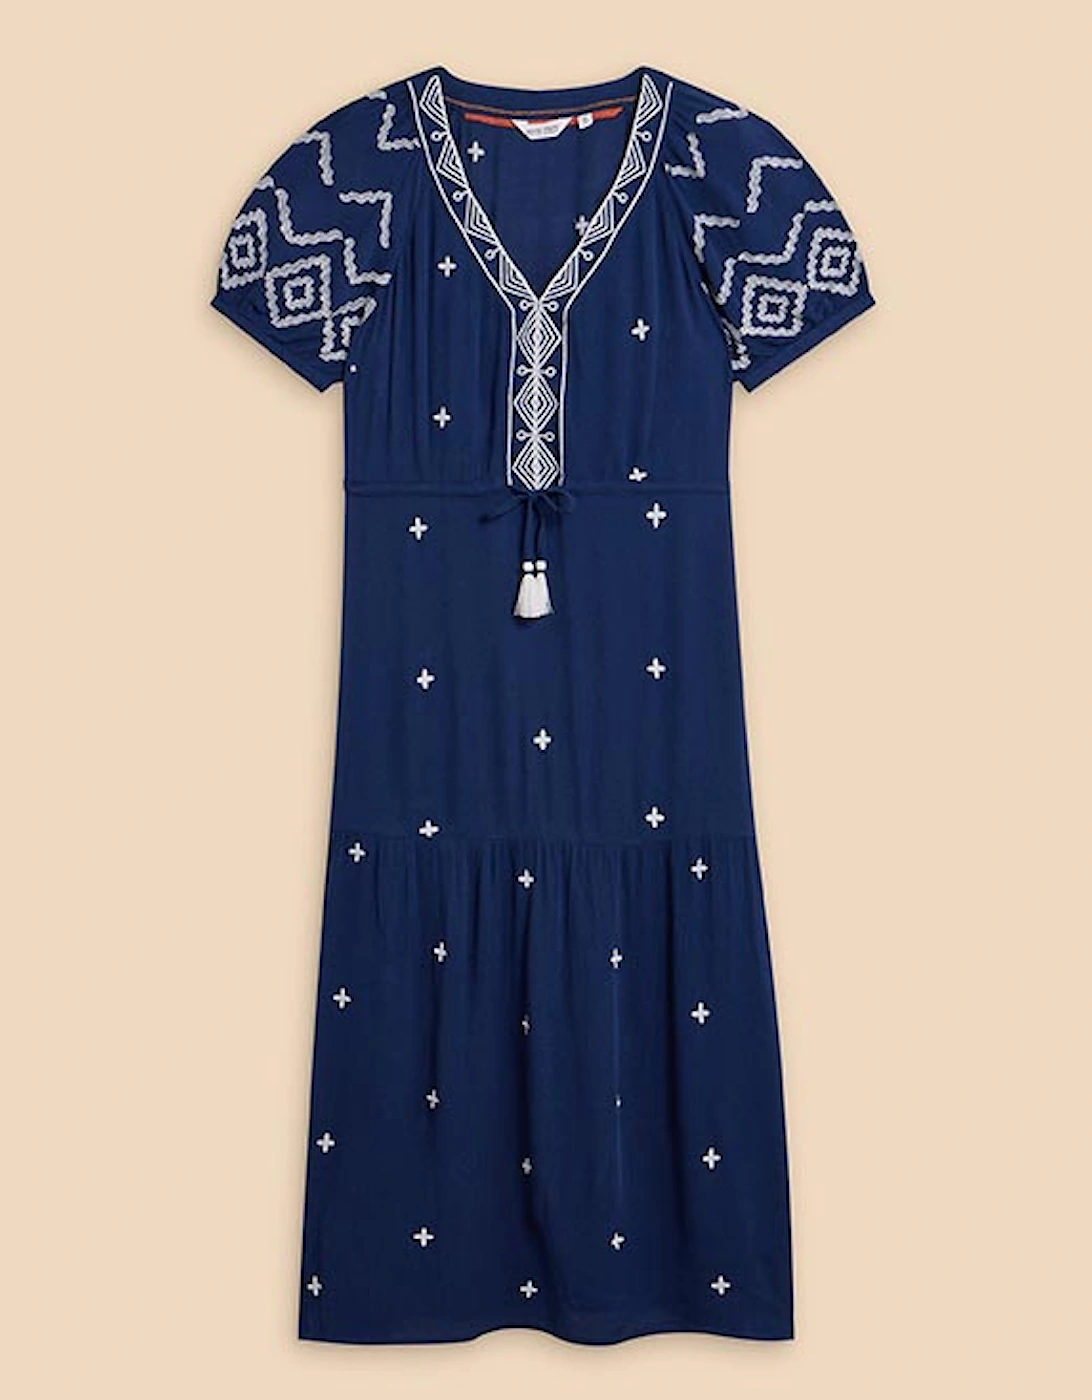 Women's Mauve Embroidered Dress Dusty Blue